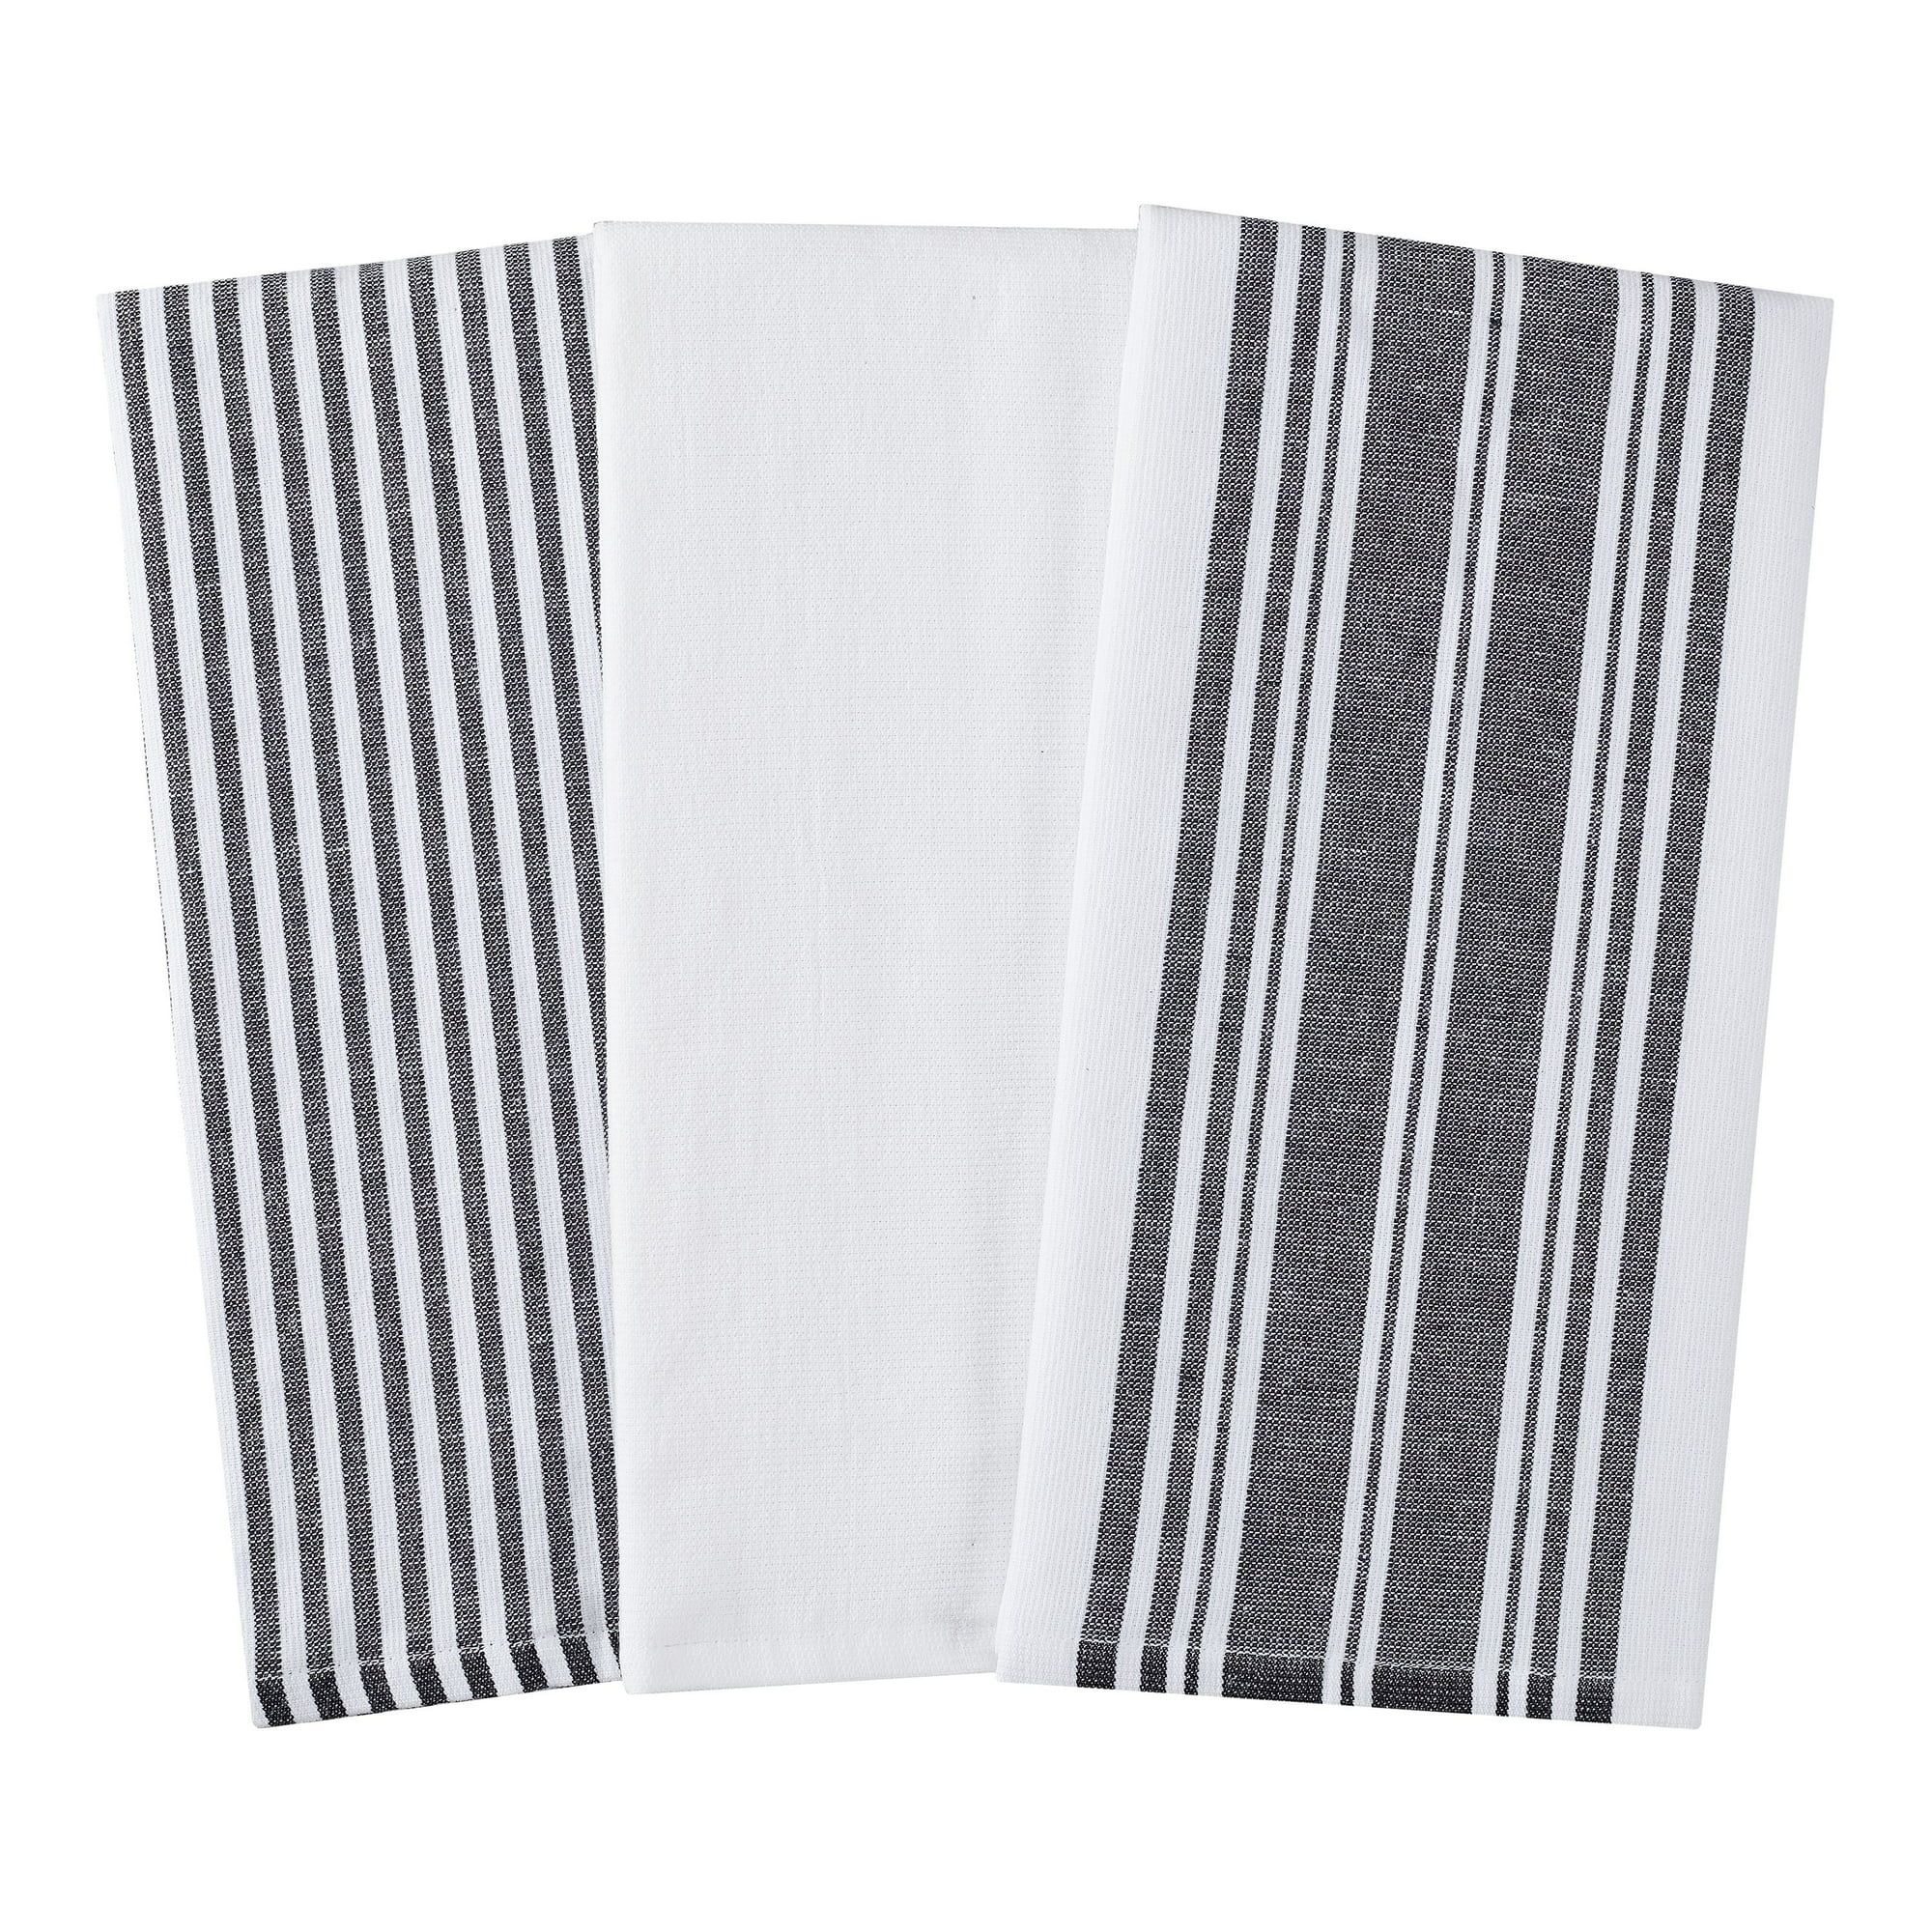 Better Homes & Gardens Culinary Stripe Kitchen Towel, Set of 3, Multiple Colors | Walmart (US)